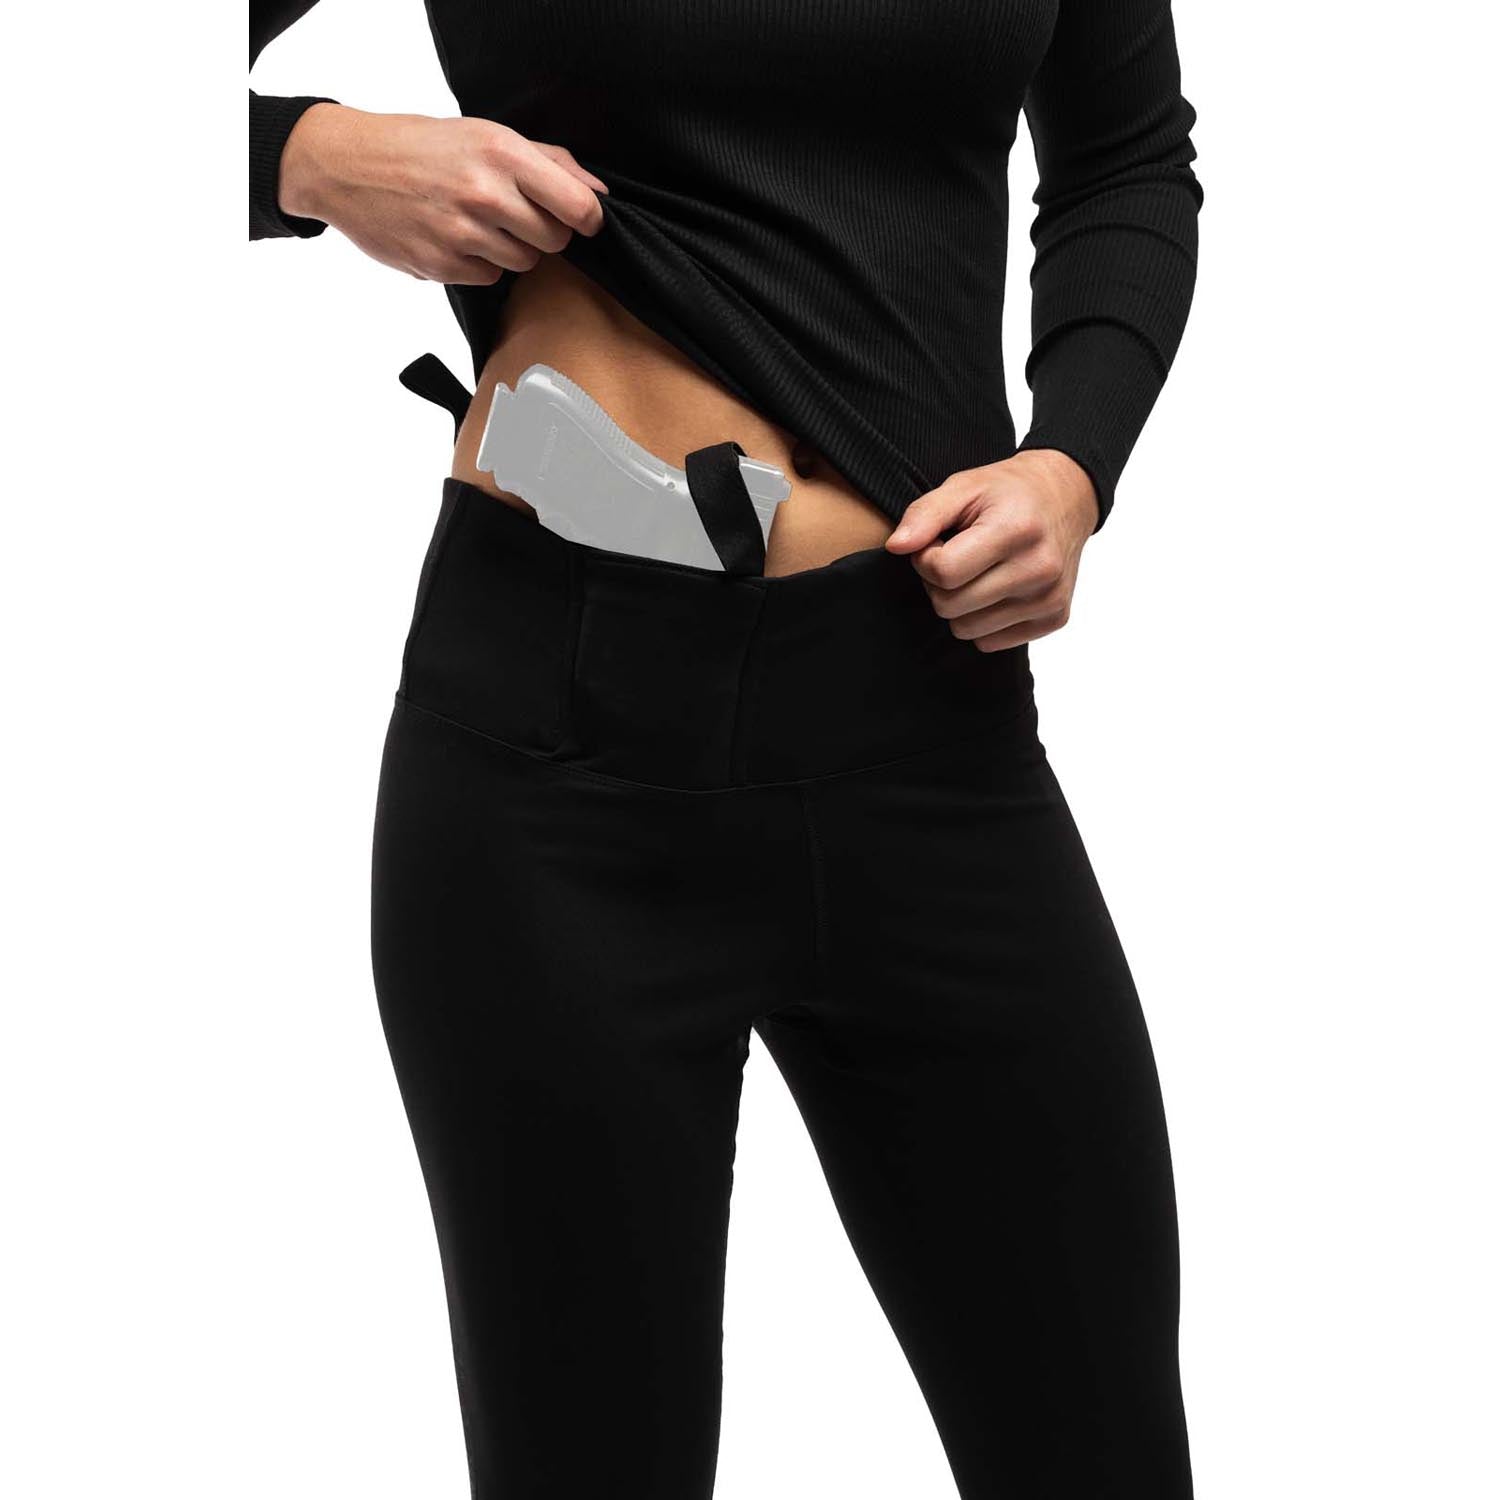 NEW Concealed Carry Leggings  Concealed carry women, Concealed carry  clothing, Concealed carry shorts